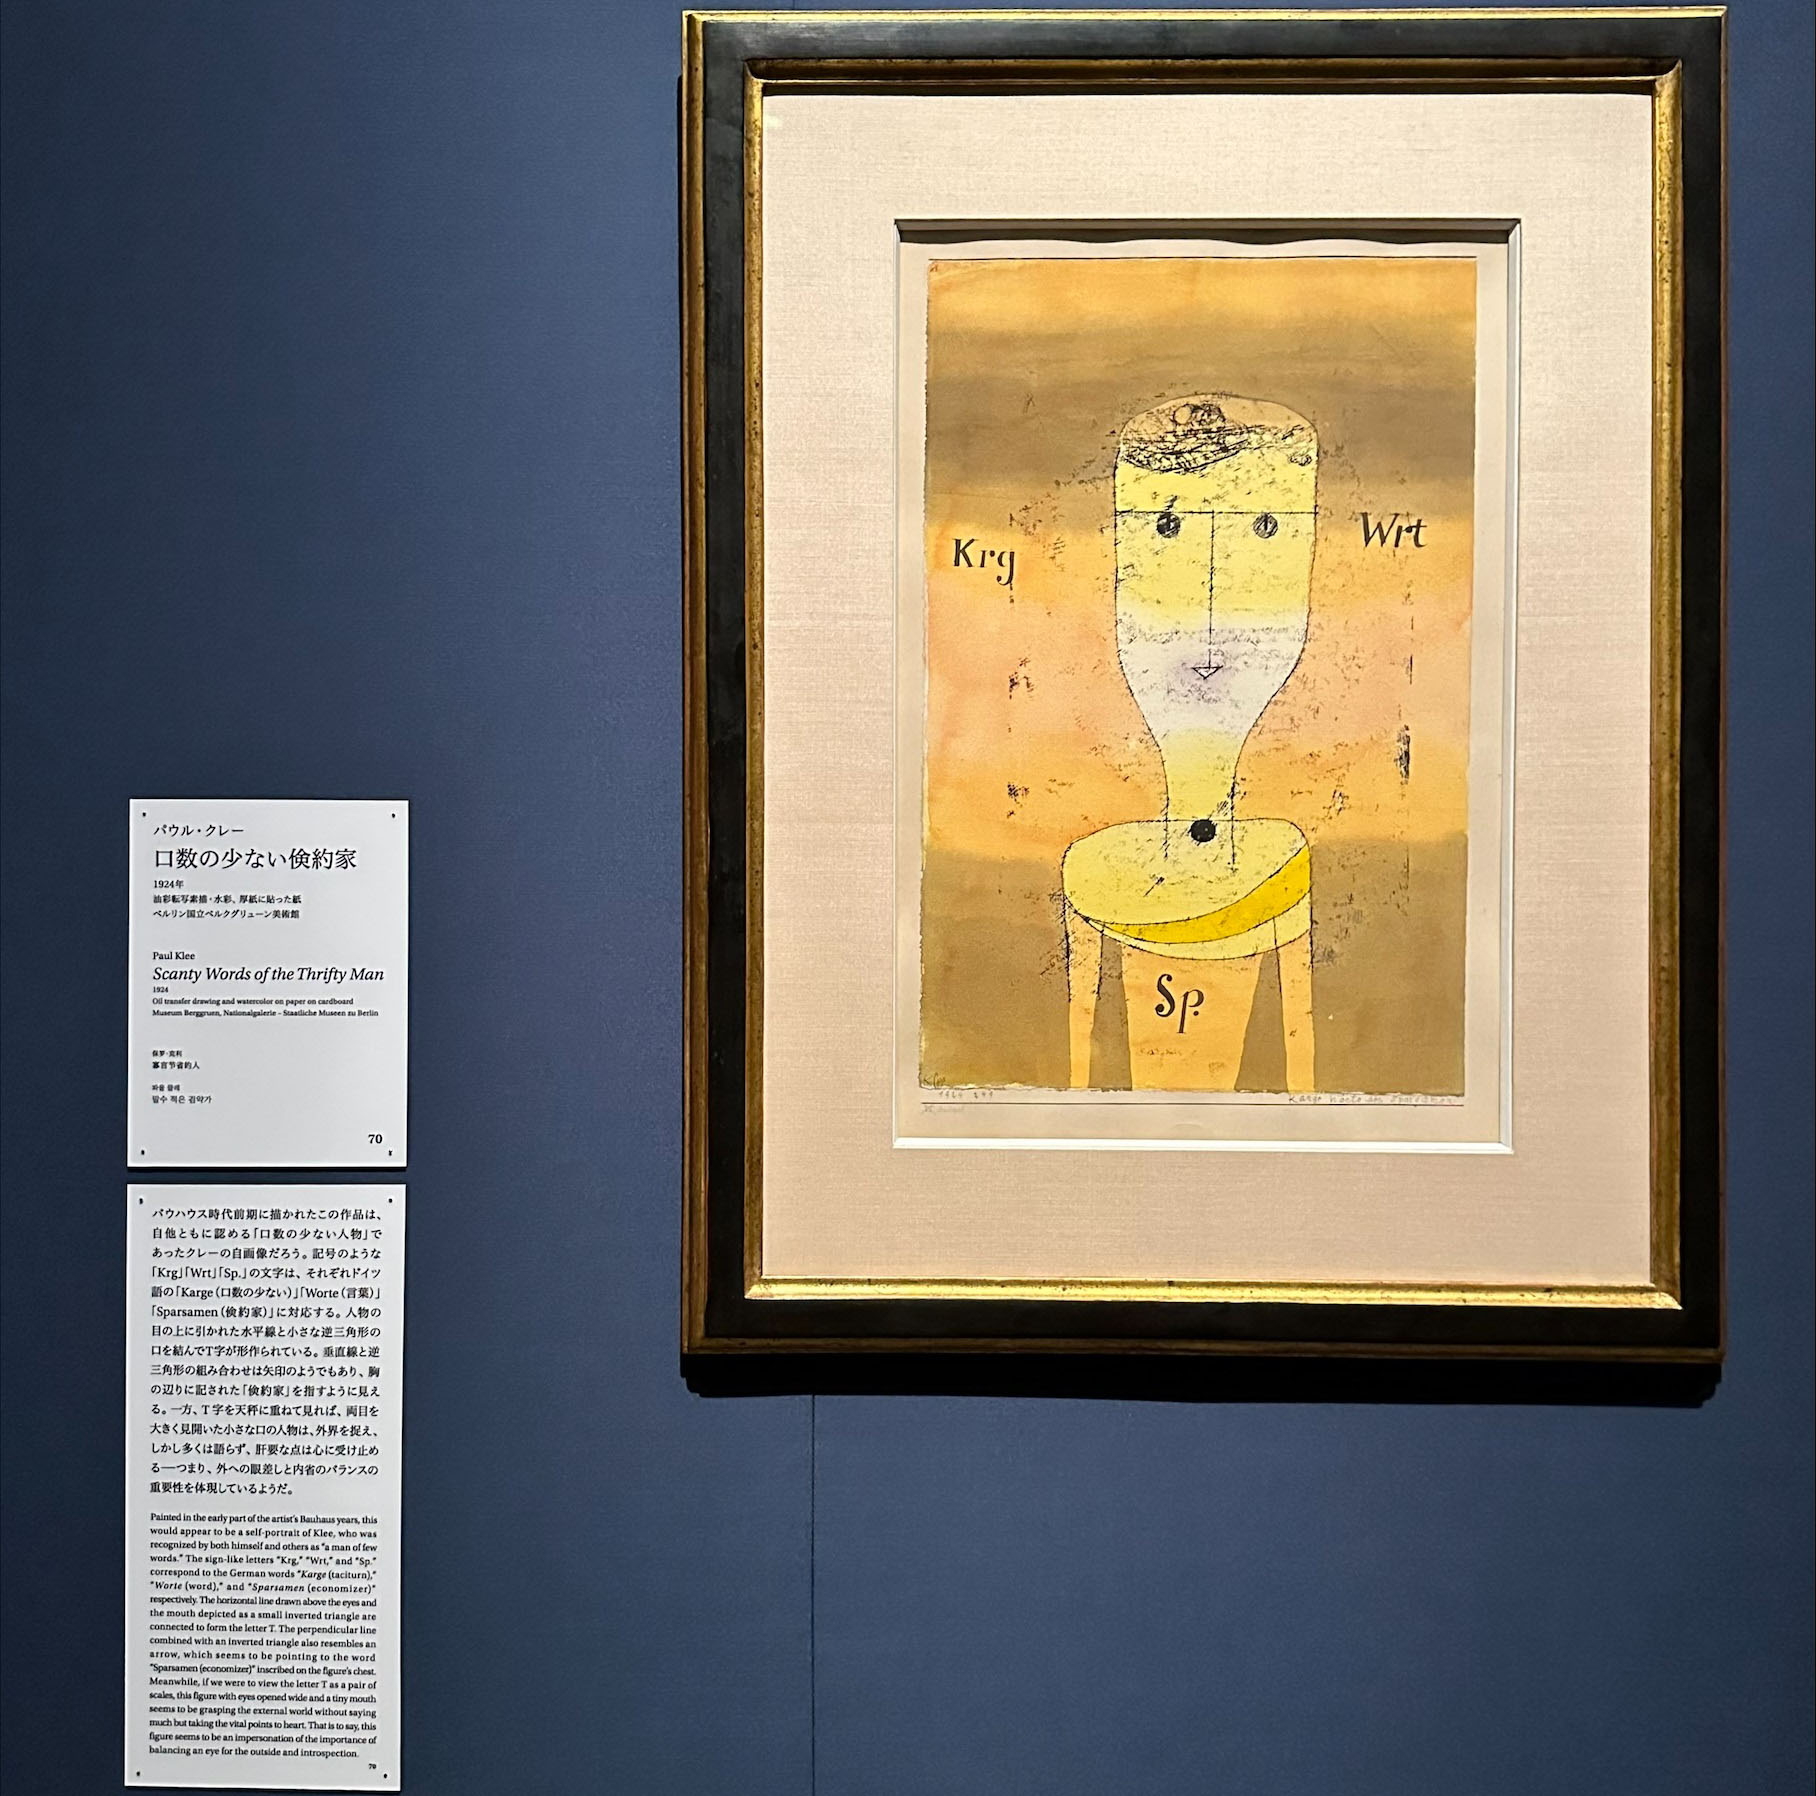 Paul Klee at Picasso exhibition